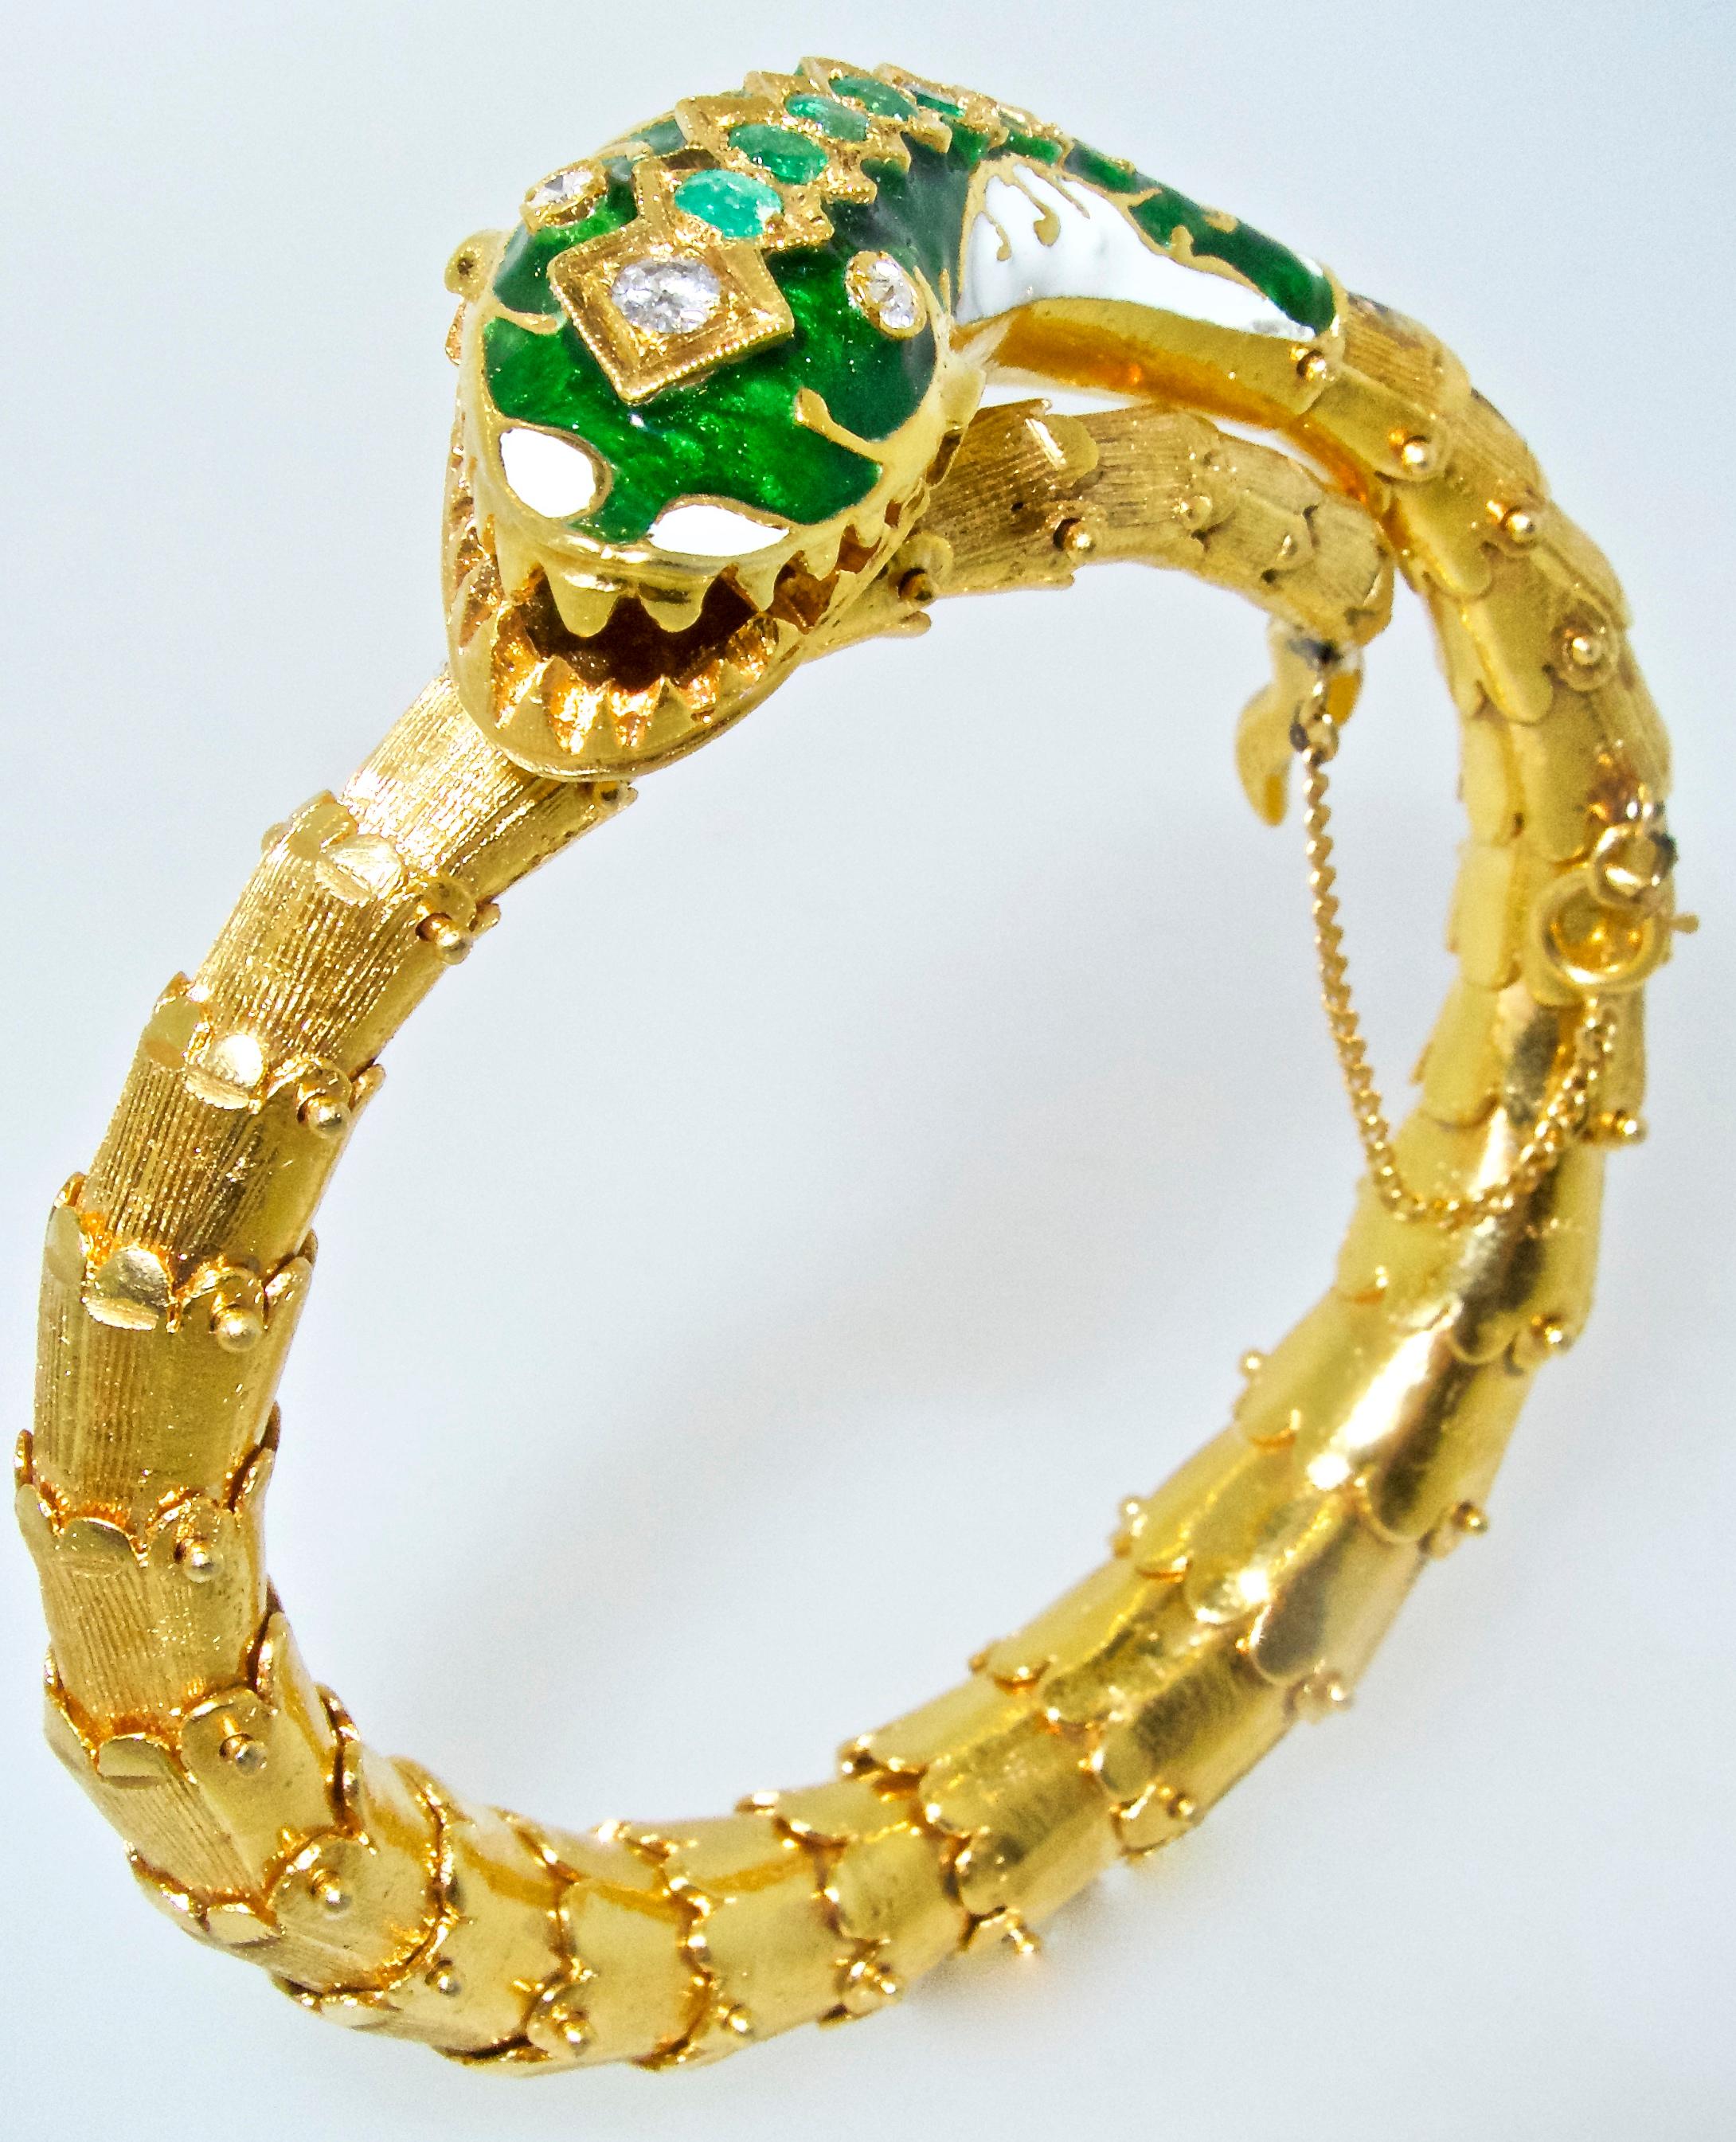 18K yellow gold serpent or snake bracelet adorned with emeralds and diamonds.   His scales are articulated, his head is green and white enamel.  Our happy serpent weighs 62.88 grams and has an interior dimension of 6.25 inches.  In Victorian